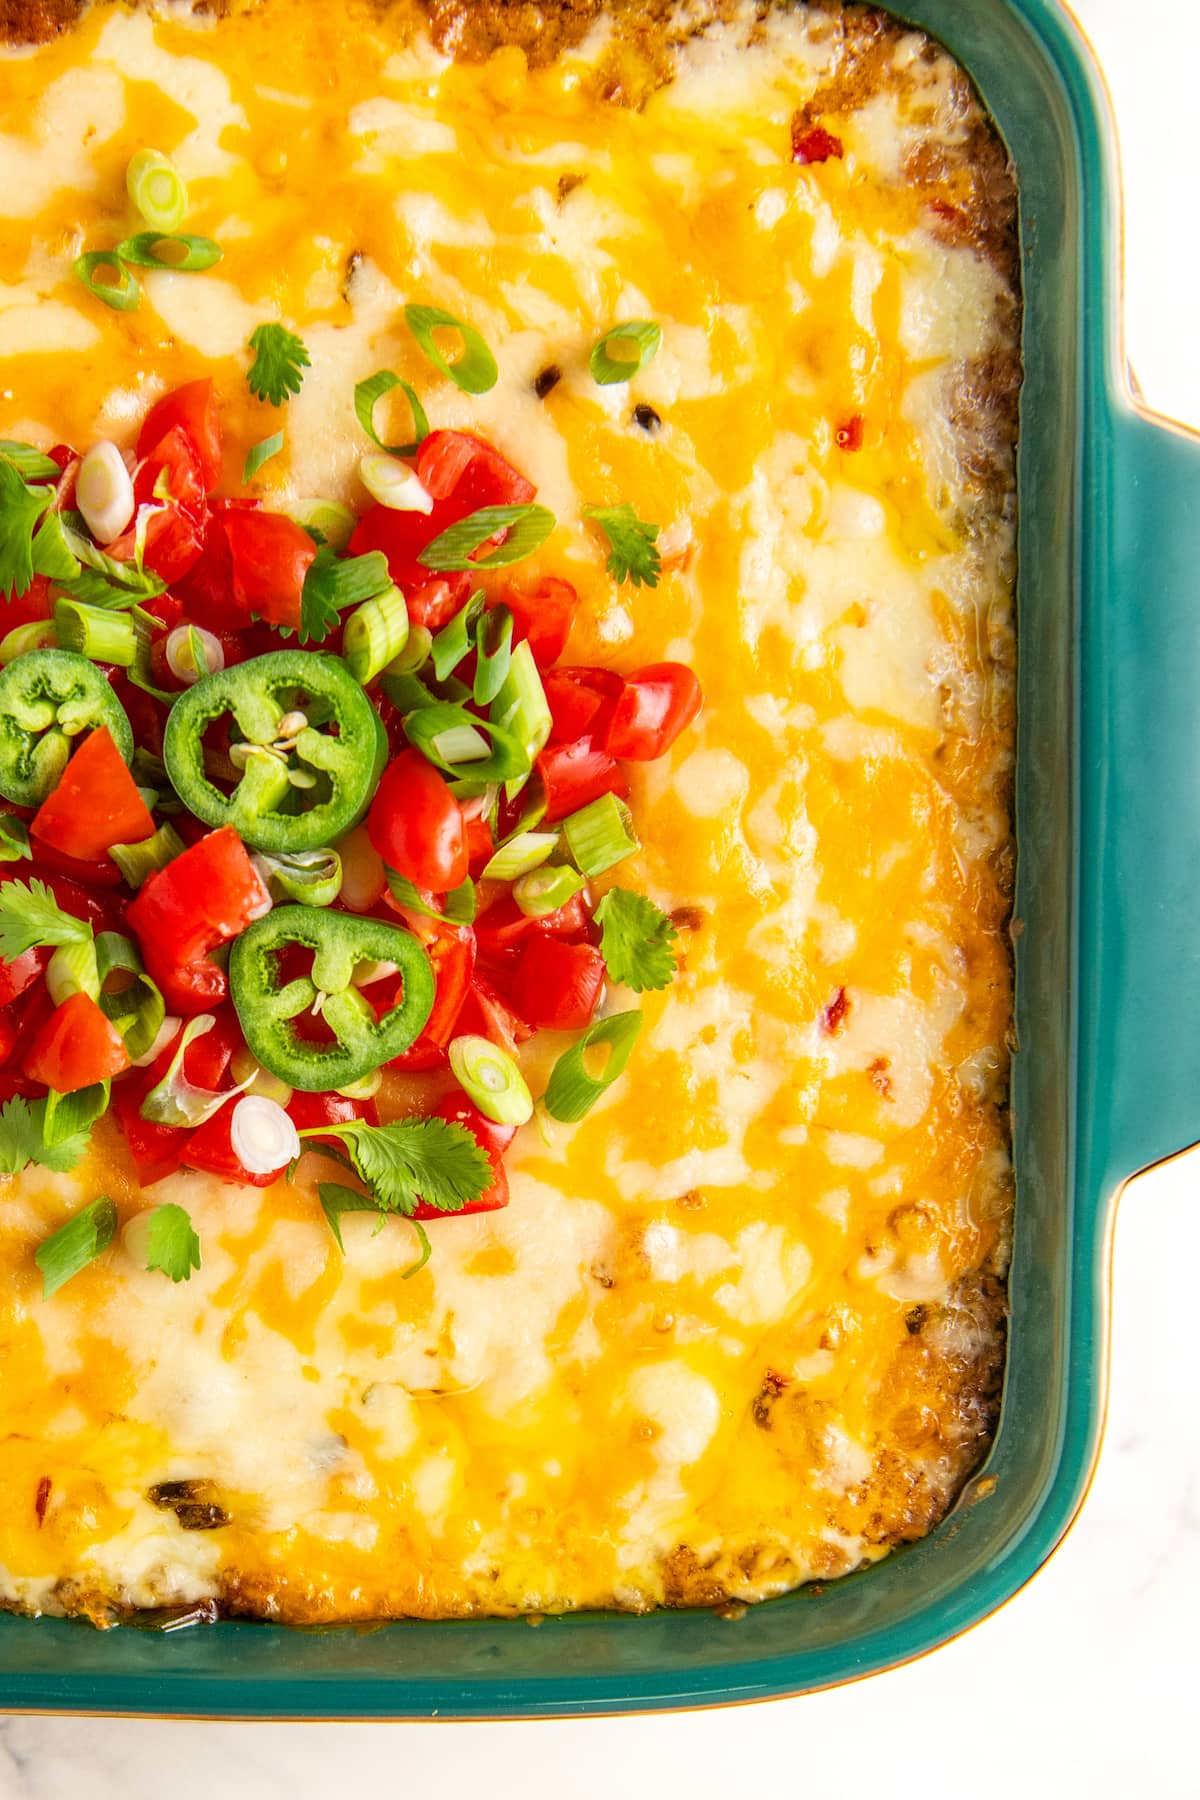 Baked bean dip topped with tomatoes, jalapenos, green onions and cilantro.